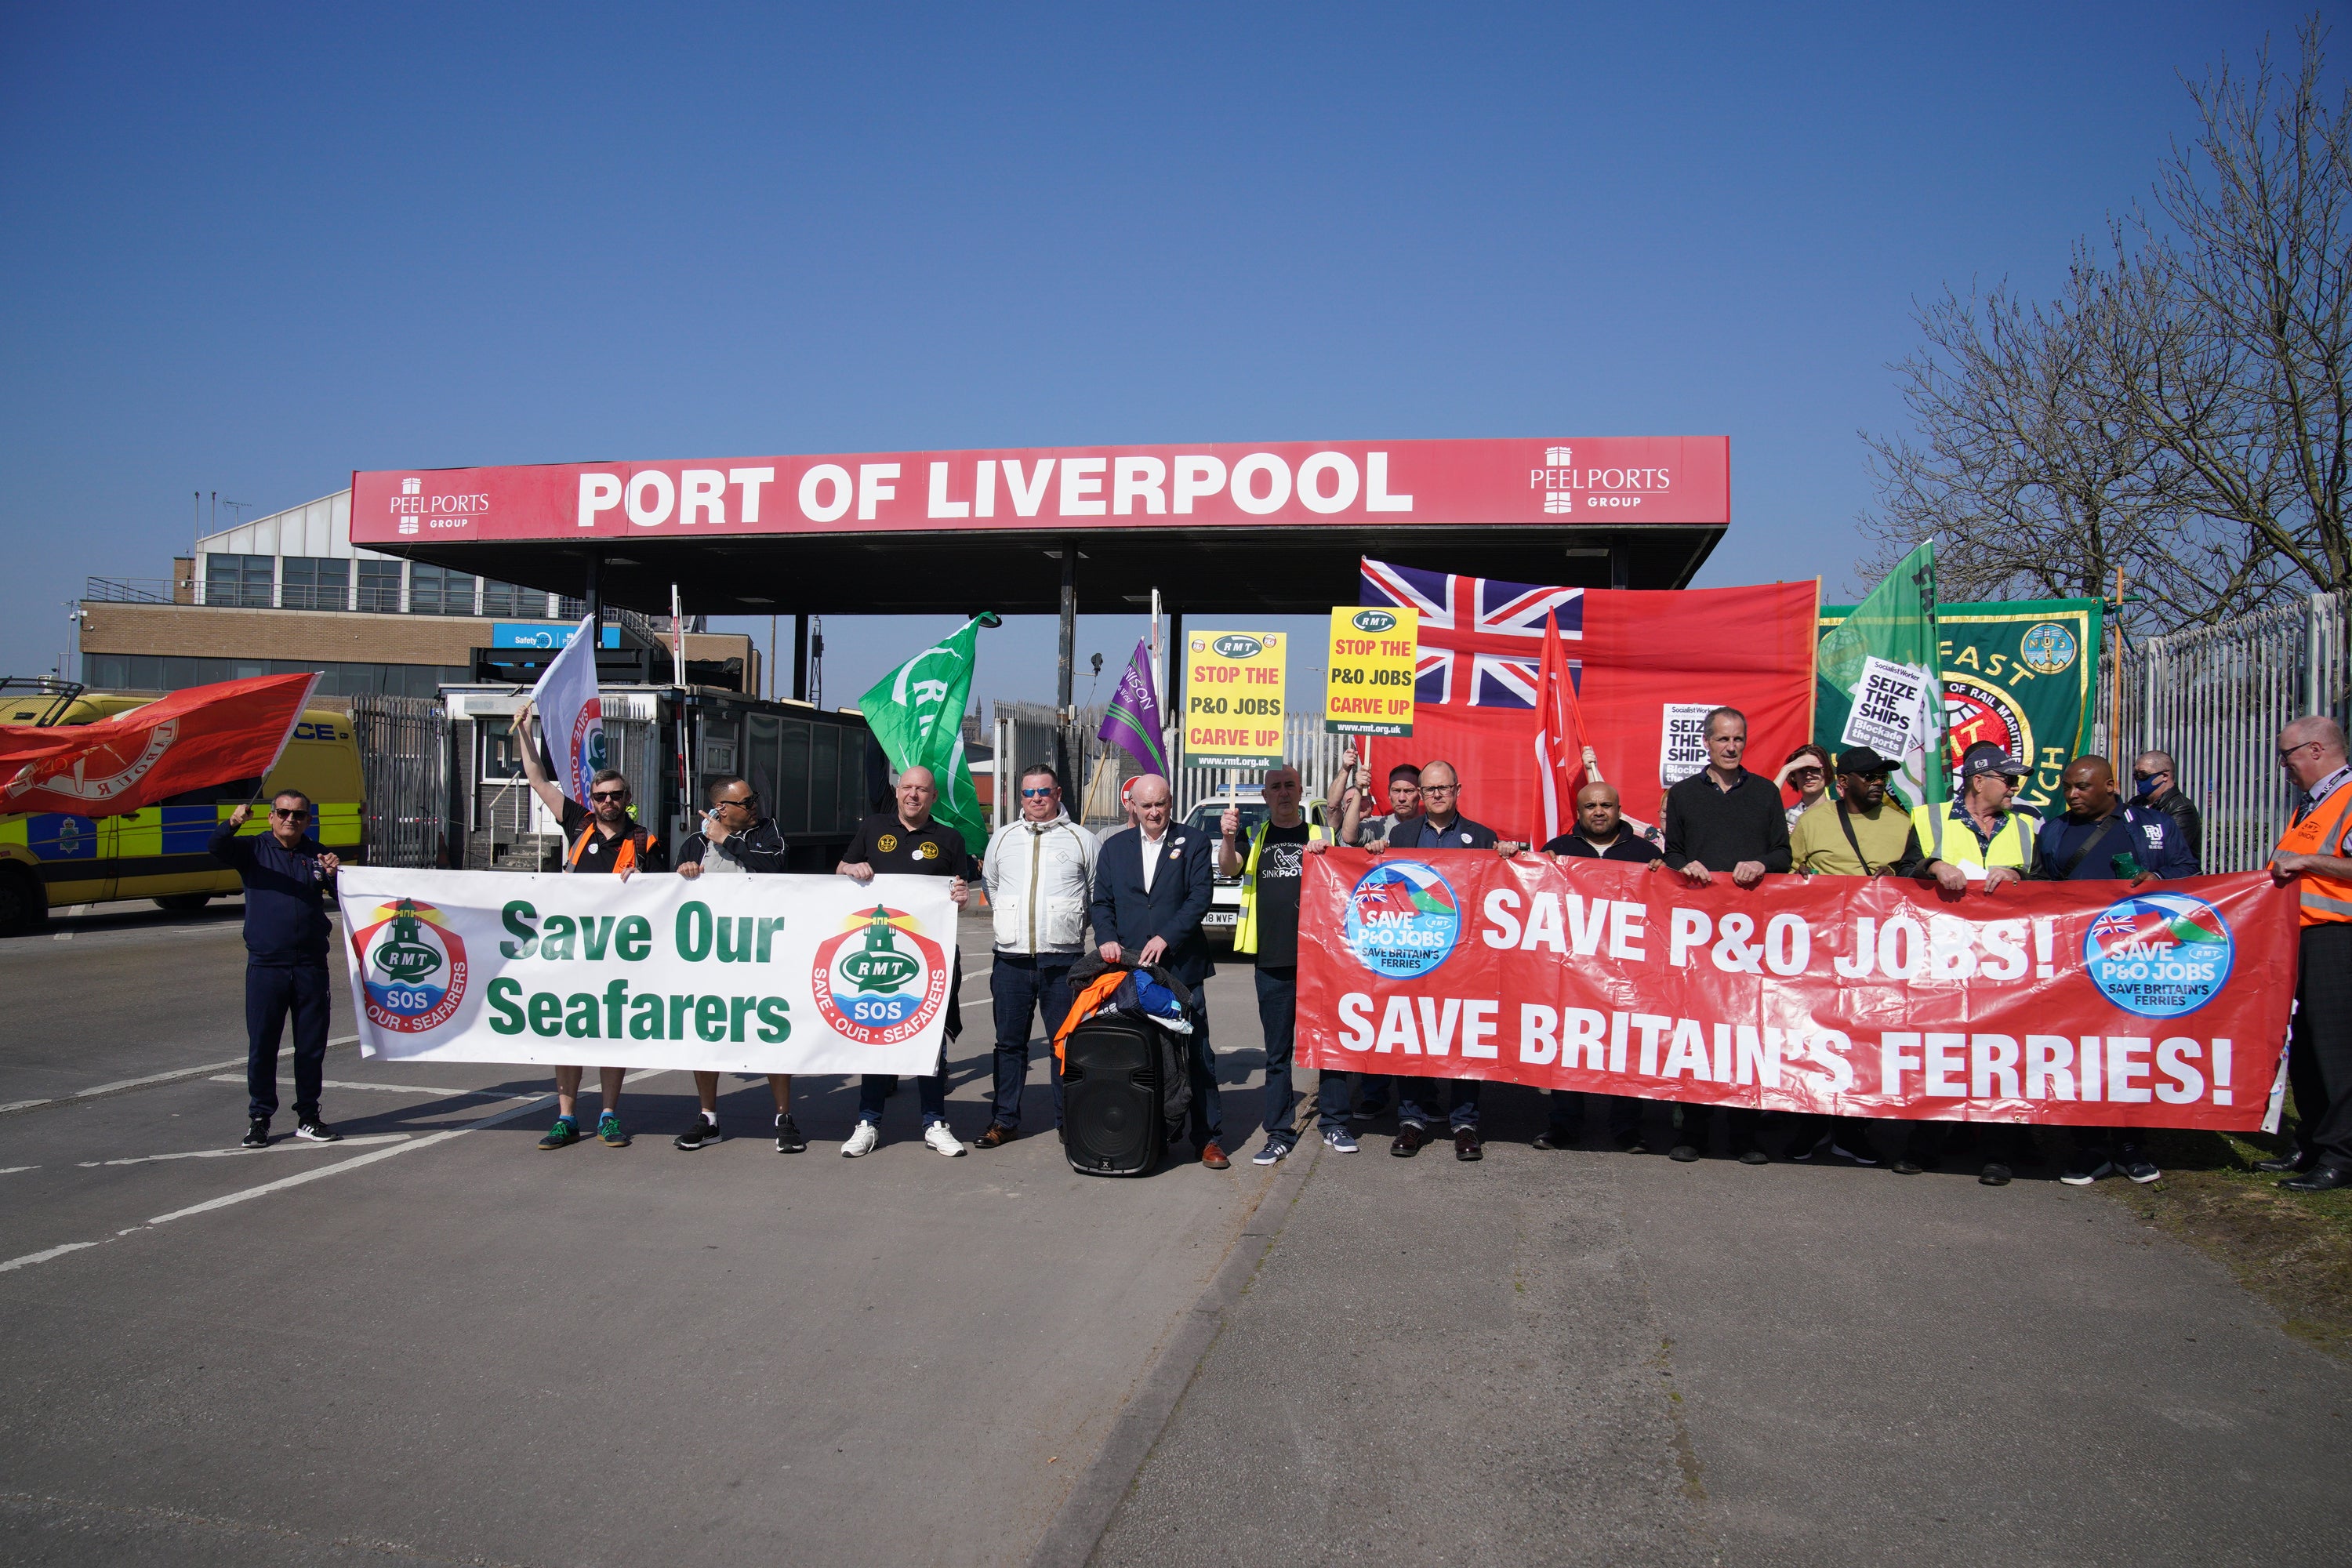 A demonstration against the dismissal of P&O workers takes place outside the Port of Liverpool (Pete Byrne/PA)